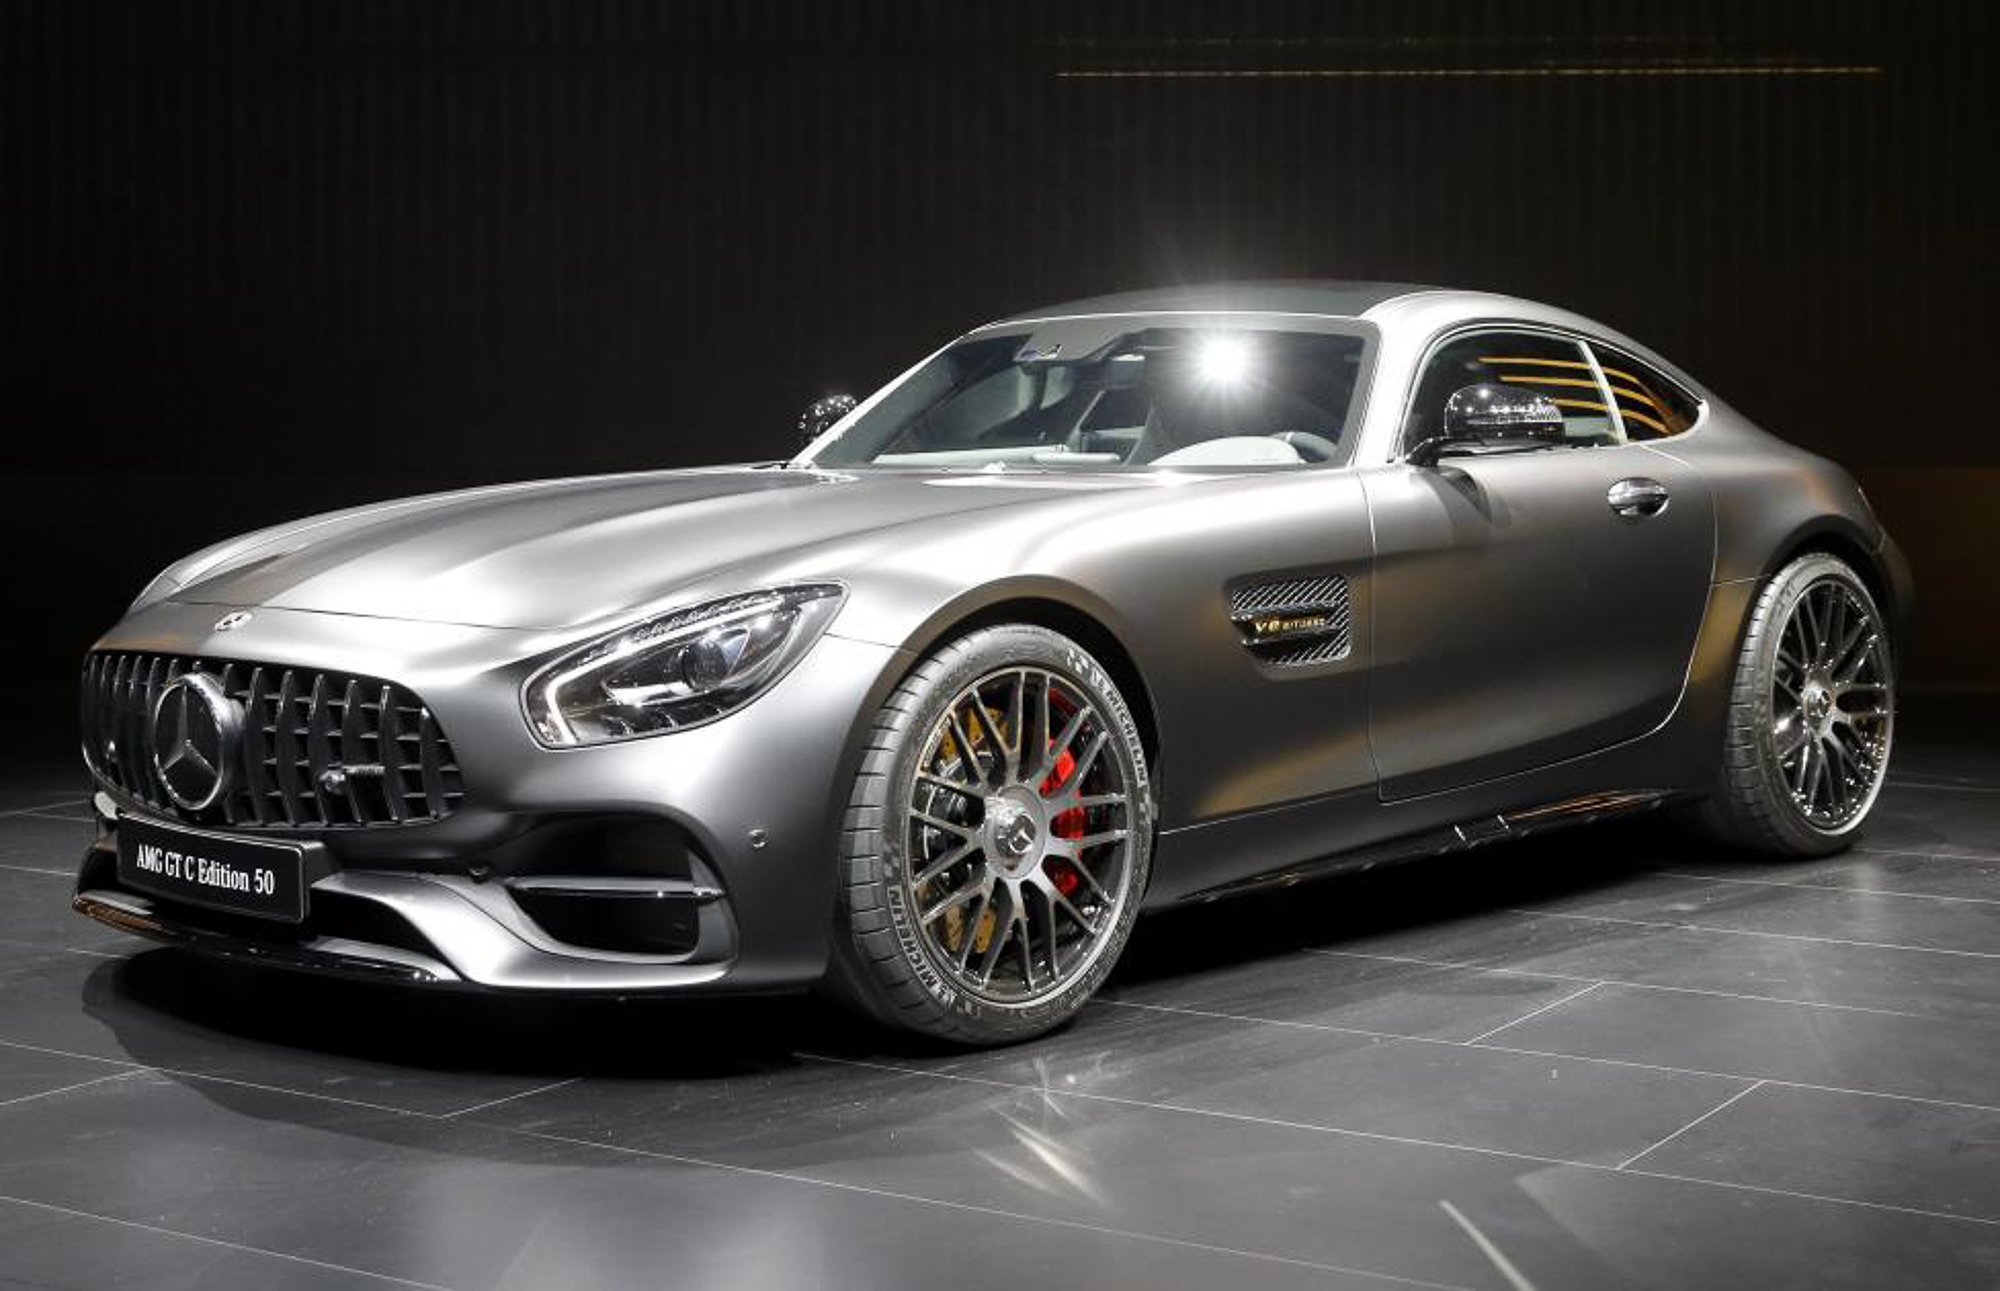 The 2018 Mercedes-AMG GT C Edition 50. PHOTO: REUTERS